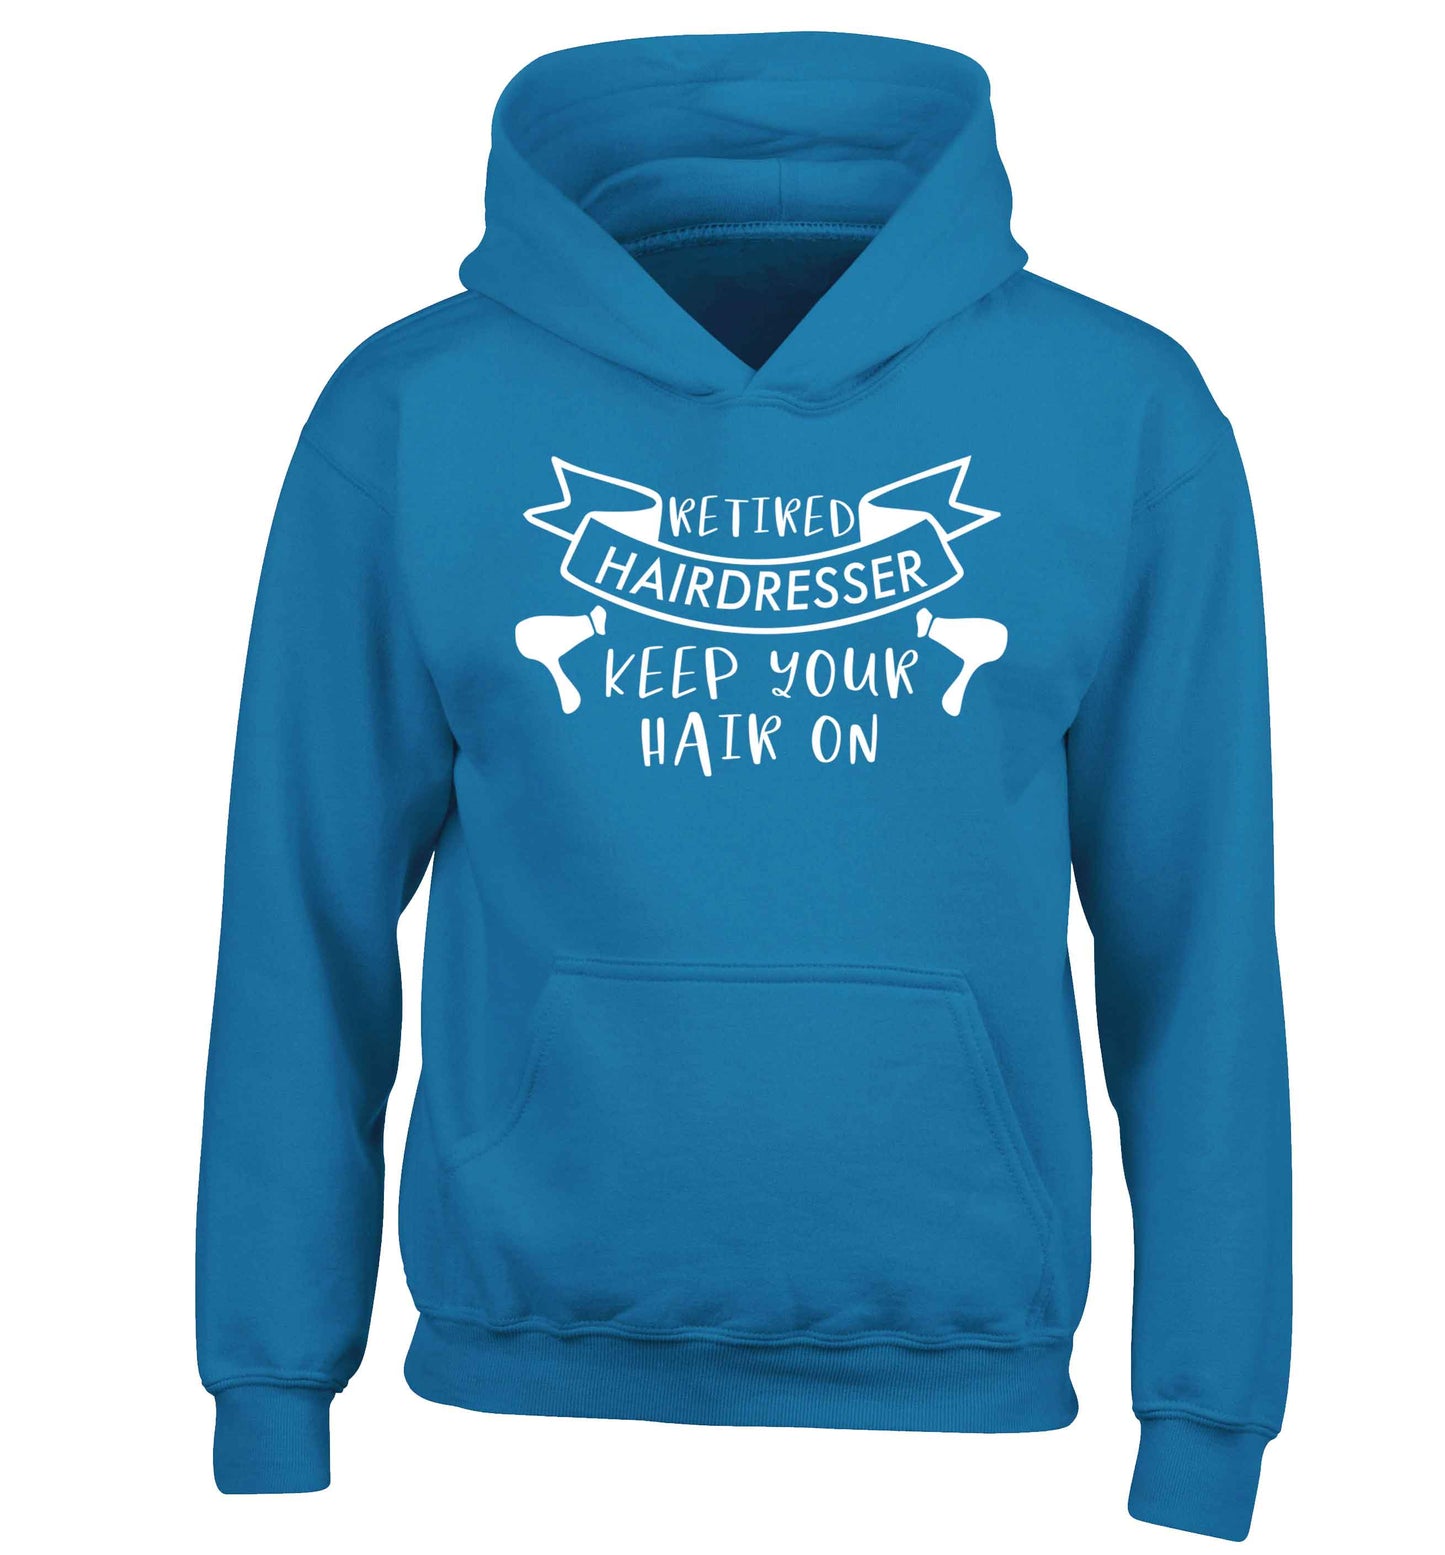 Retired hairdresser keep your hair on children's blue hoodie 12-13 Years